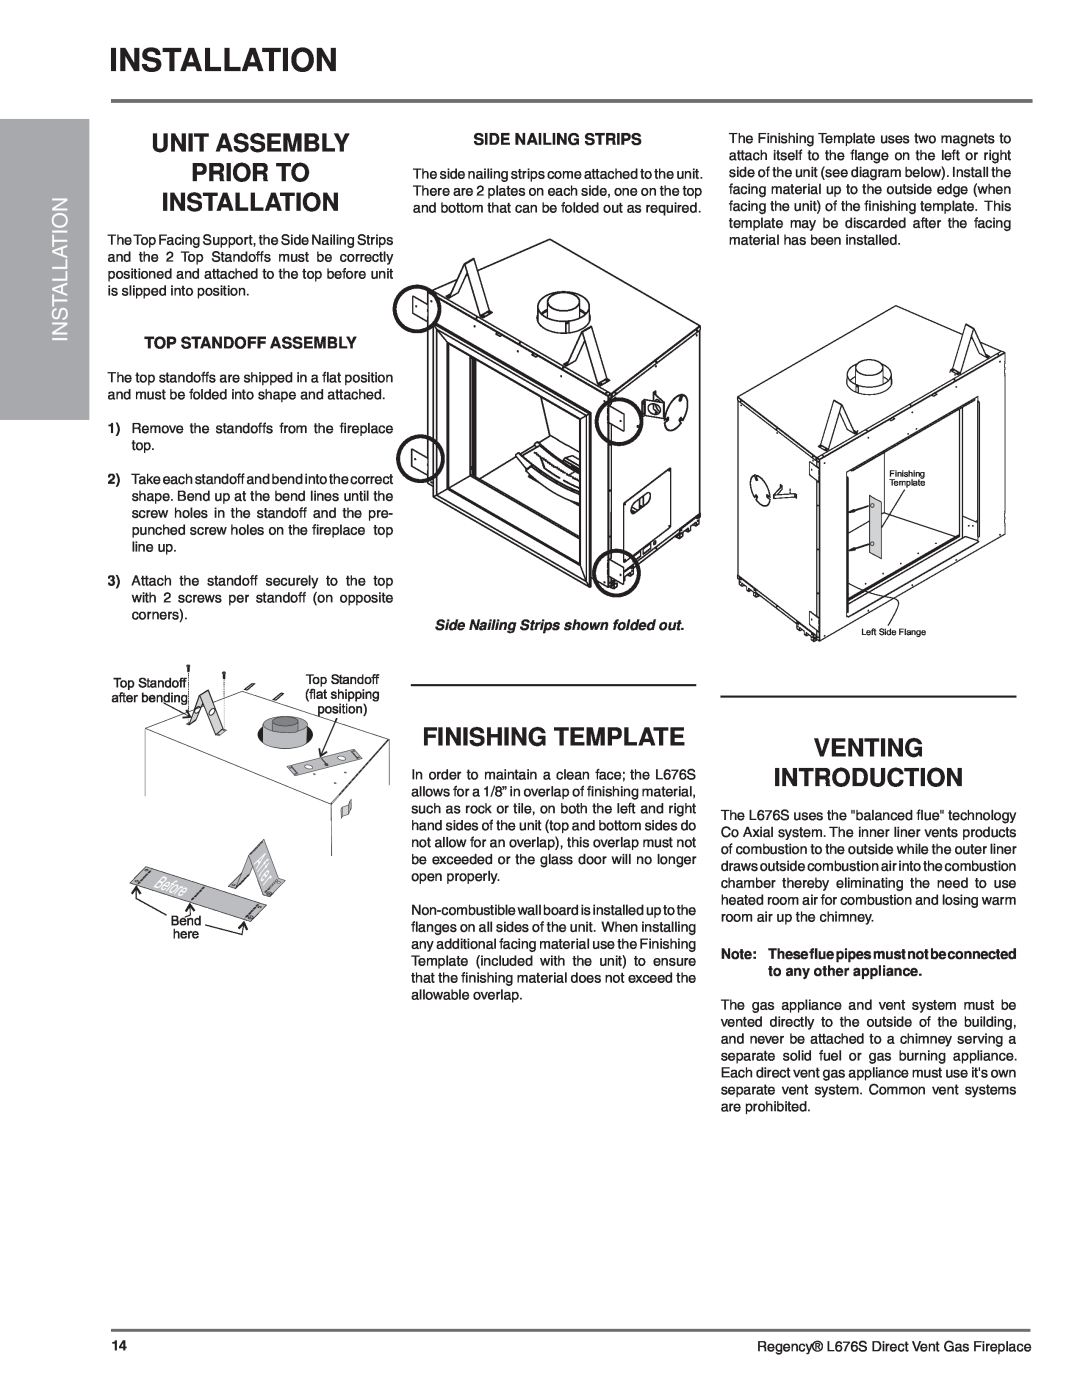 Regency L676S-NG1 installation manual Unit Assembly Prior To Installation, Finishing Template, Venting Introduction 